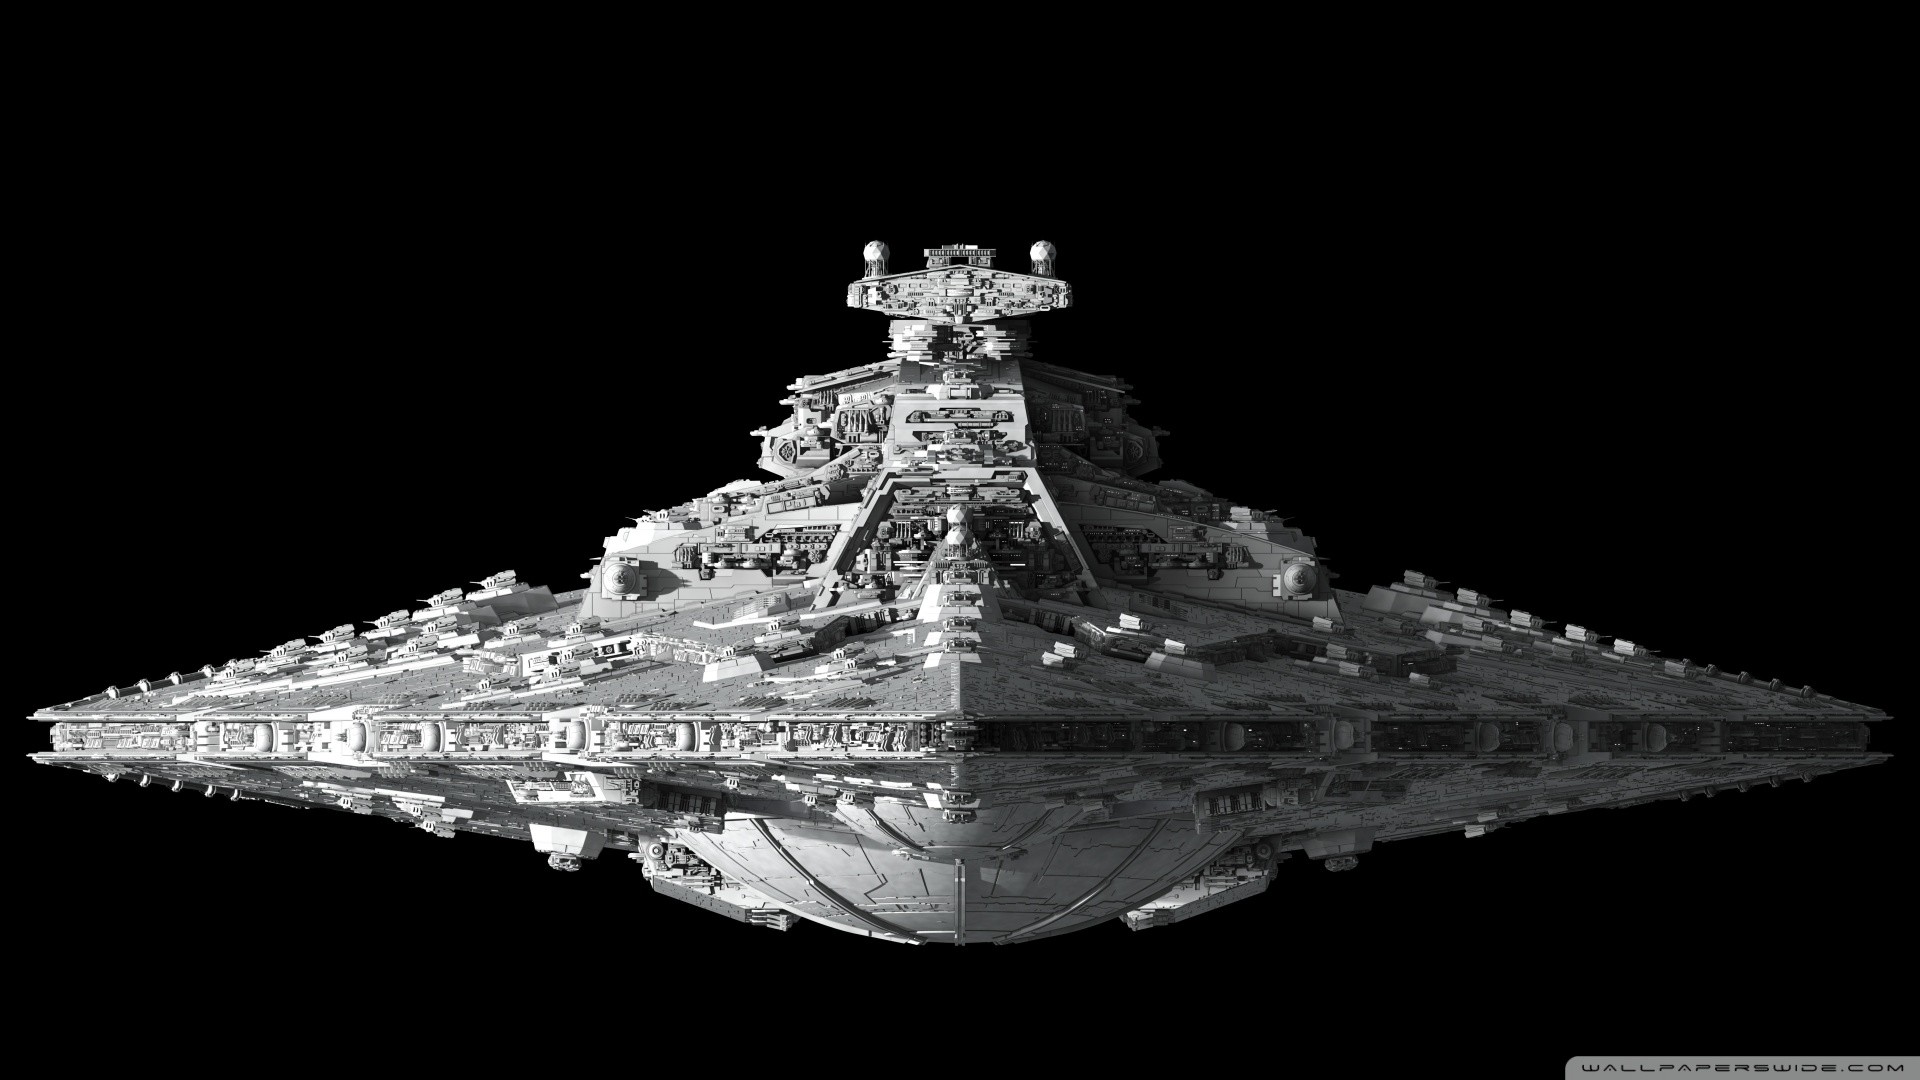 1920x1080  Star Wars Destroyer. How to set wallpaper on your desktop? Click  the download link from above and set the wallpaper on the desktop from your  OS.